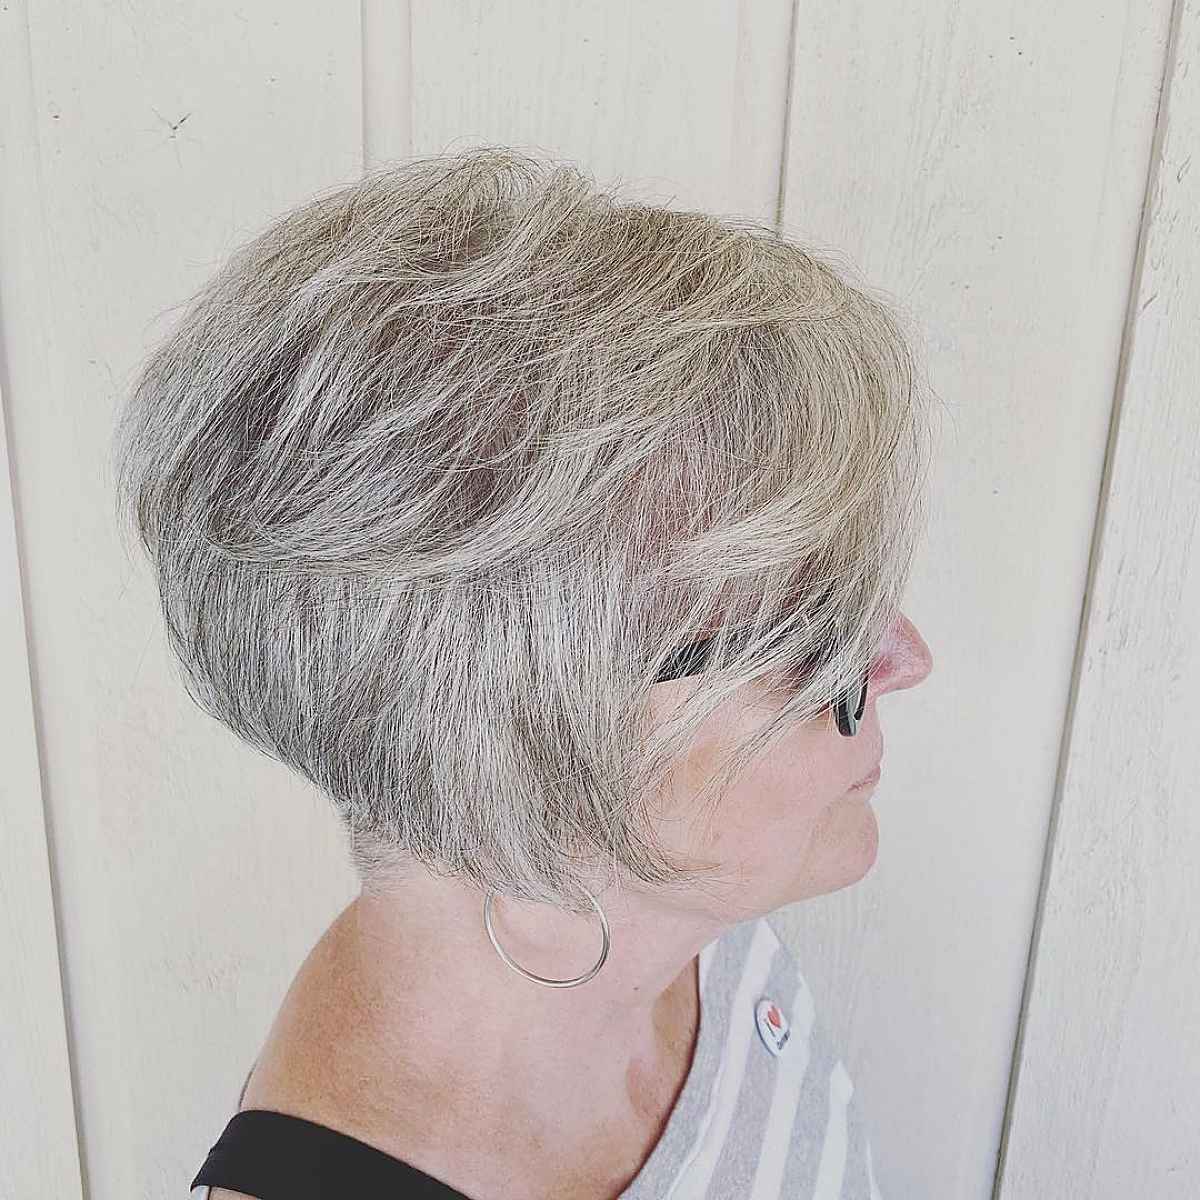 26 Flattering Hairstyles for Women Over 60 with Glasses